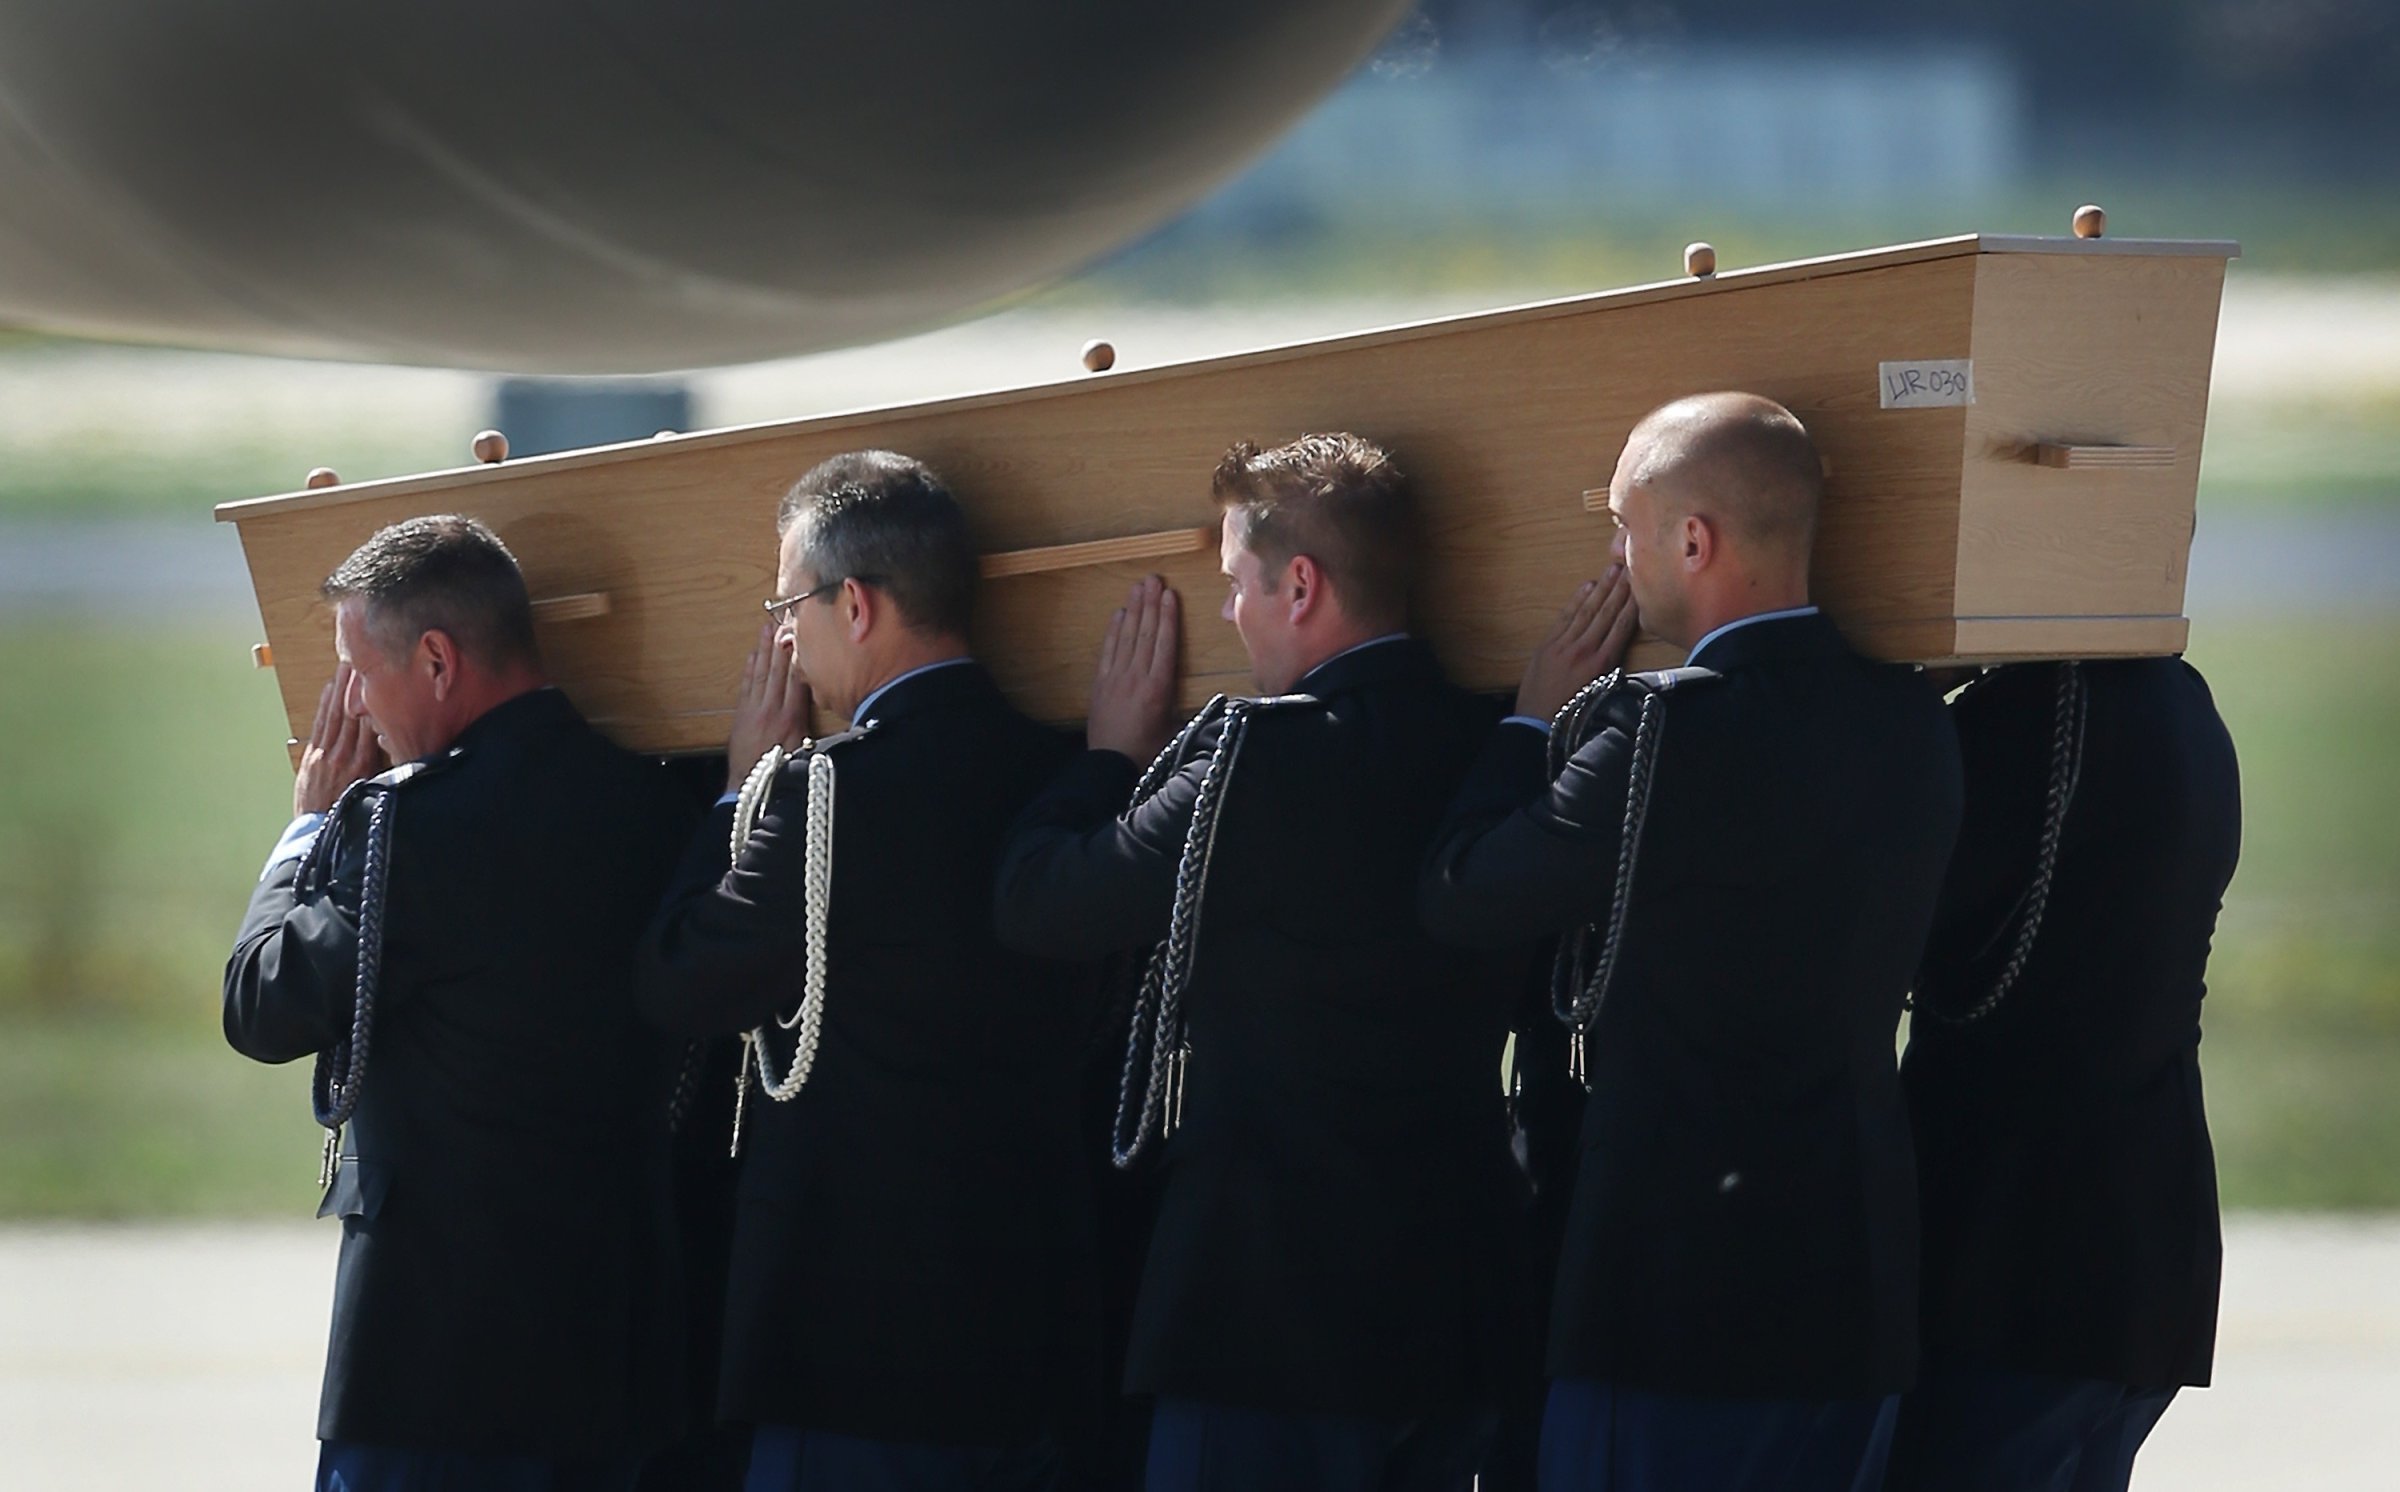 The Bodies Of The MH17 Plane Crash Are Repatriated From The Ukraine To The Netherlands